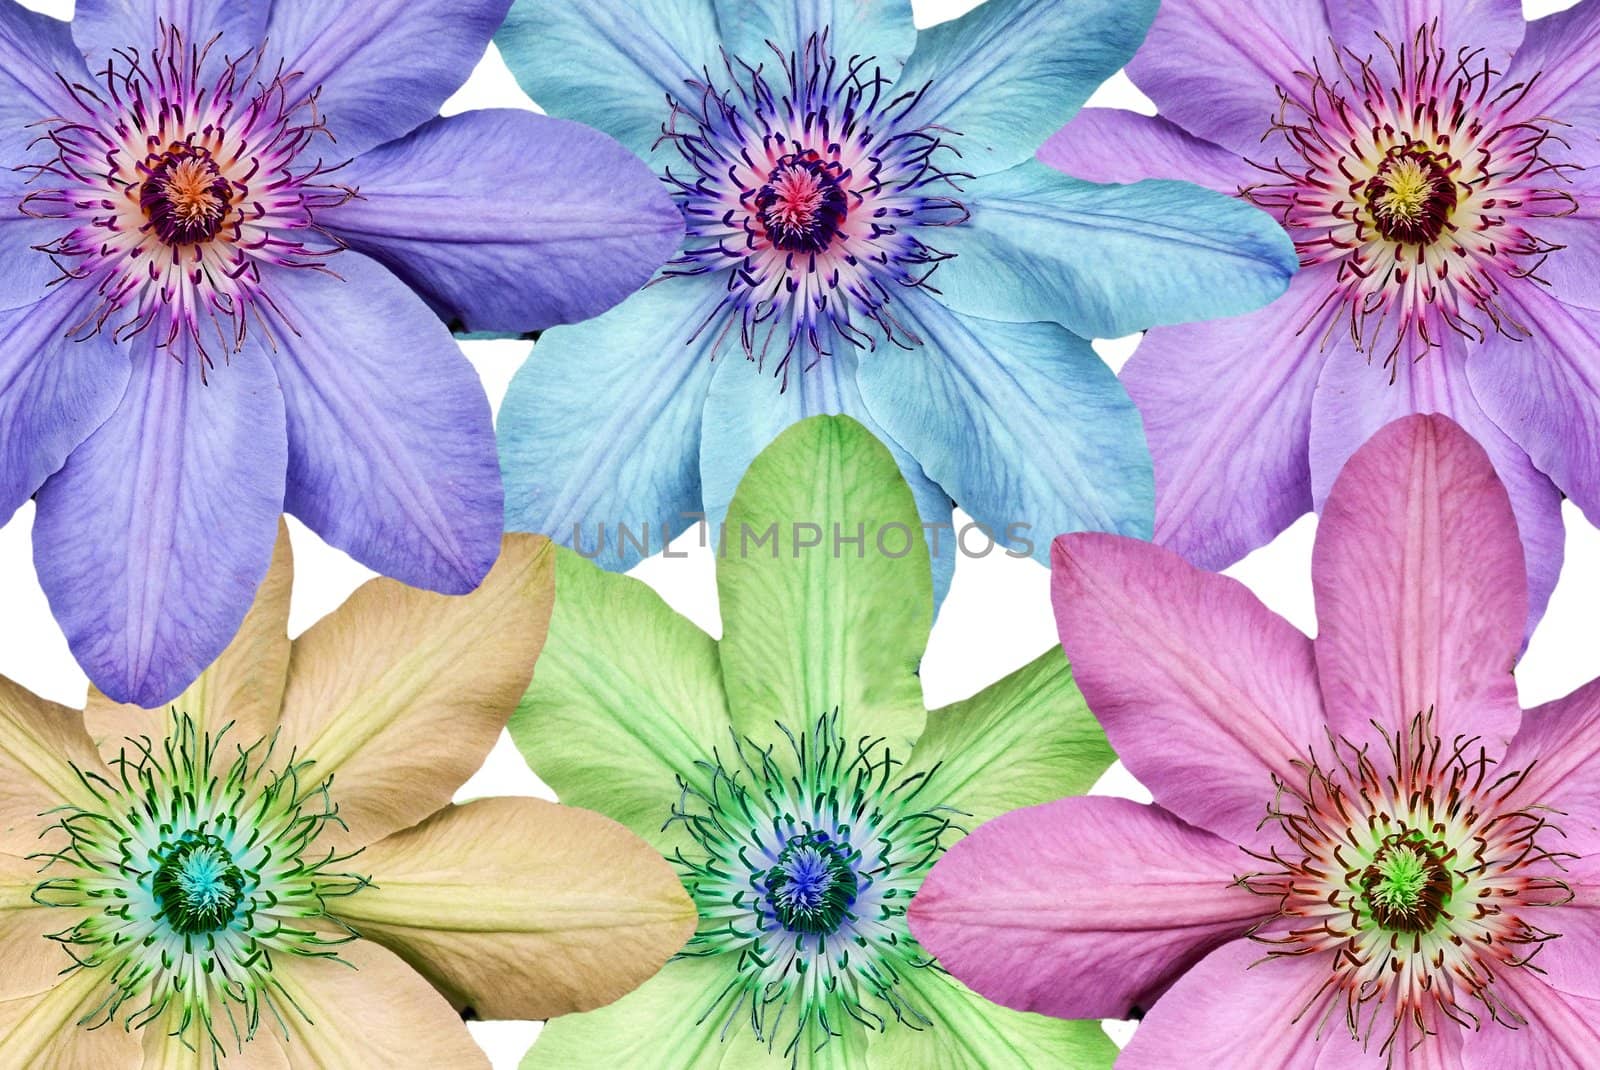 Montage of the Clematis flower head with the hue changed on each